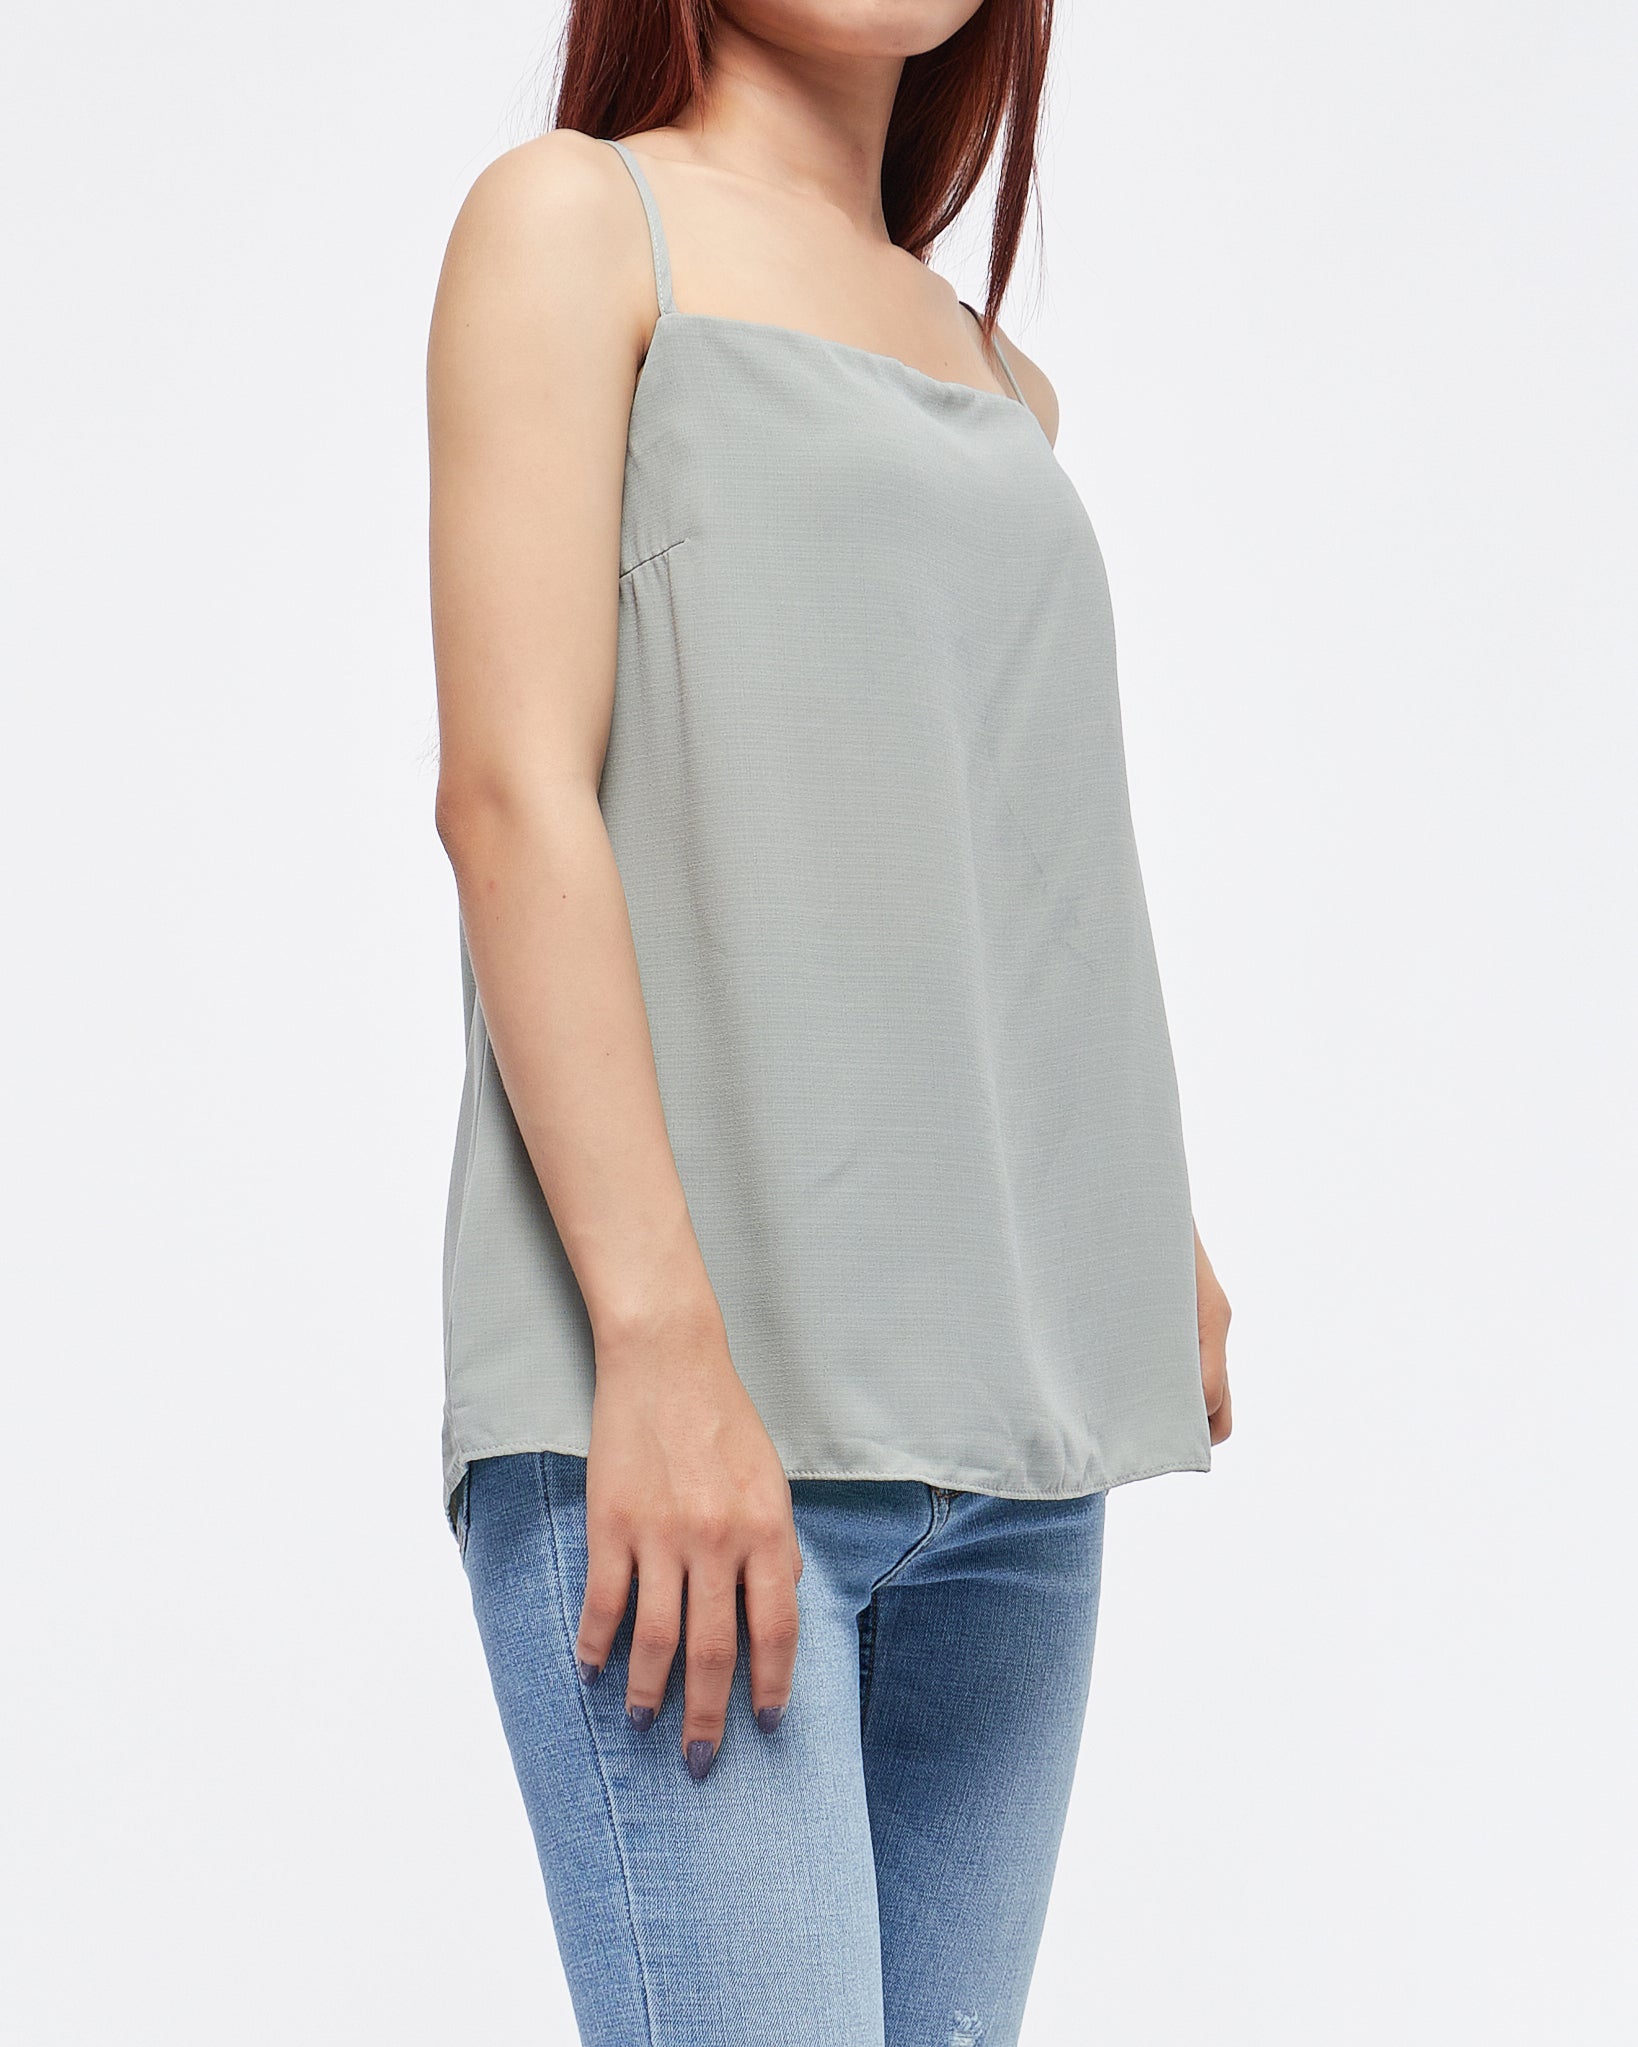 MOI OUTFIT-Plain Color Lady Top Sleeveless 14.50